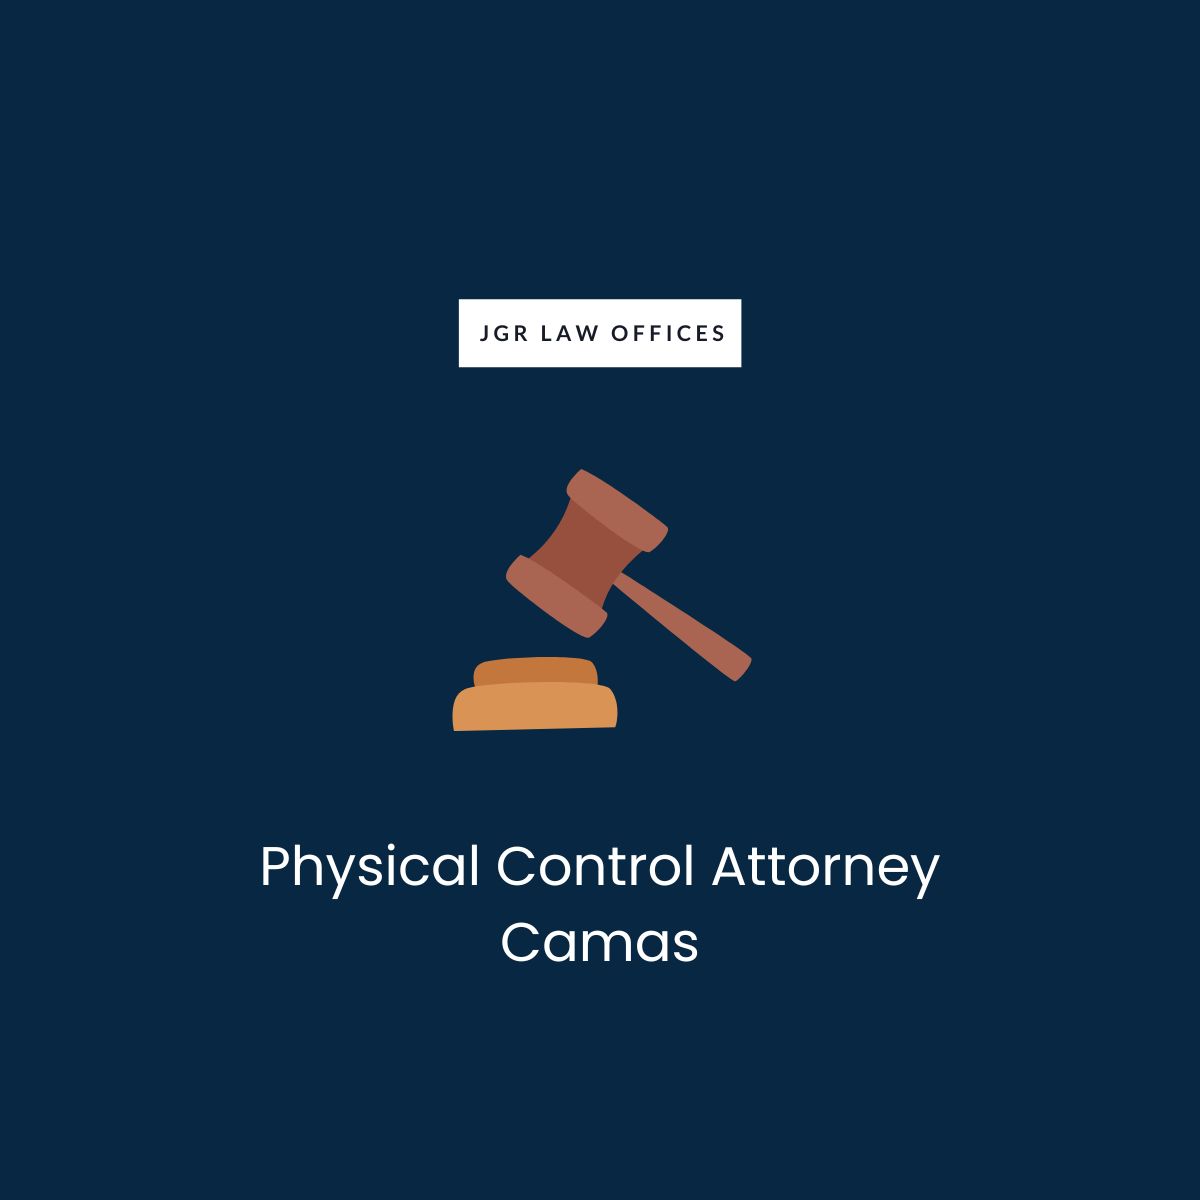 Physical Control Lawyer Camas Physical Control